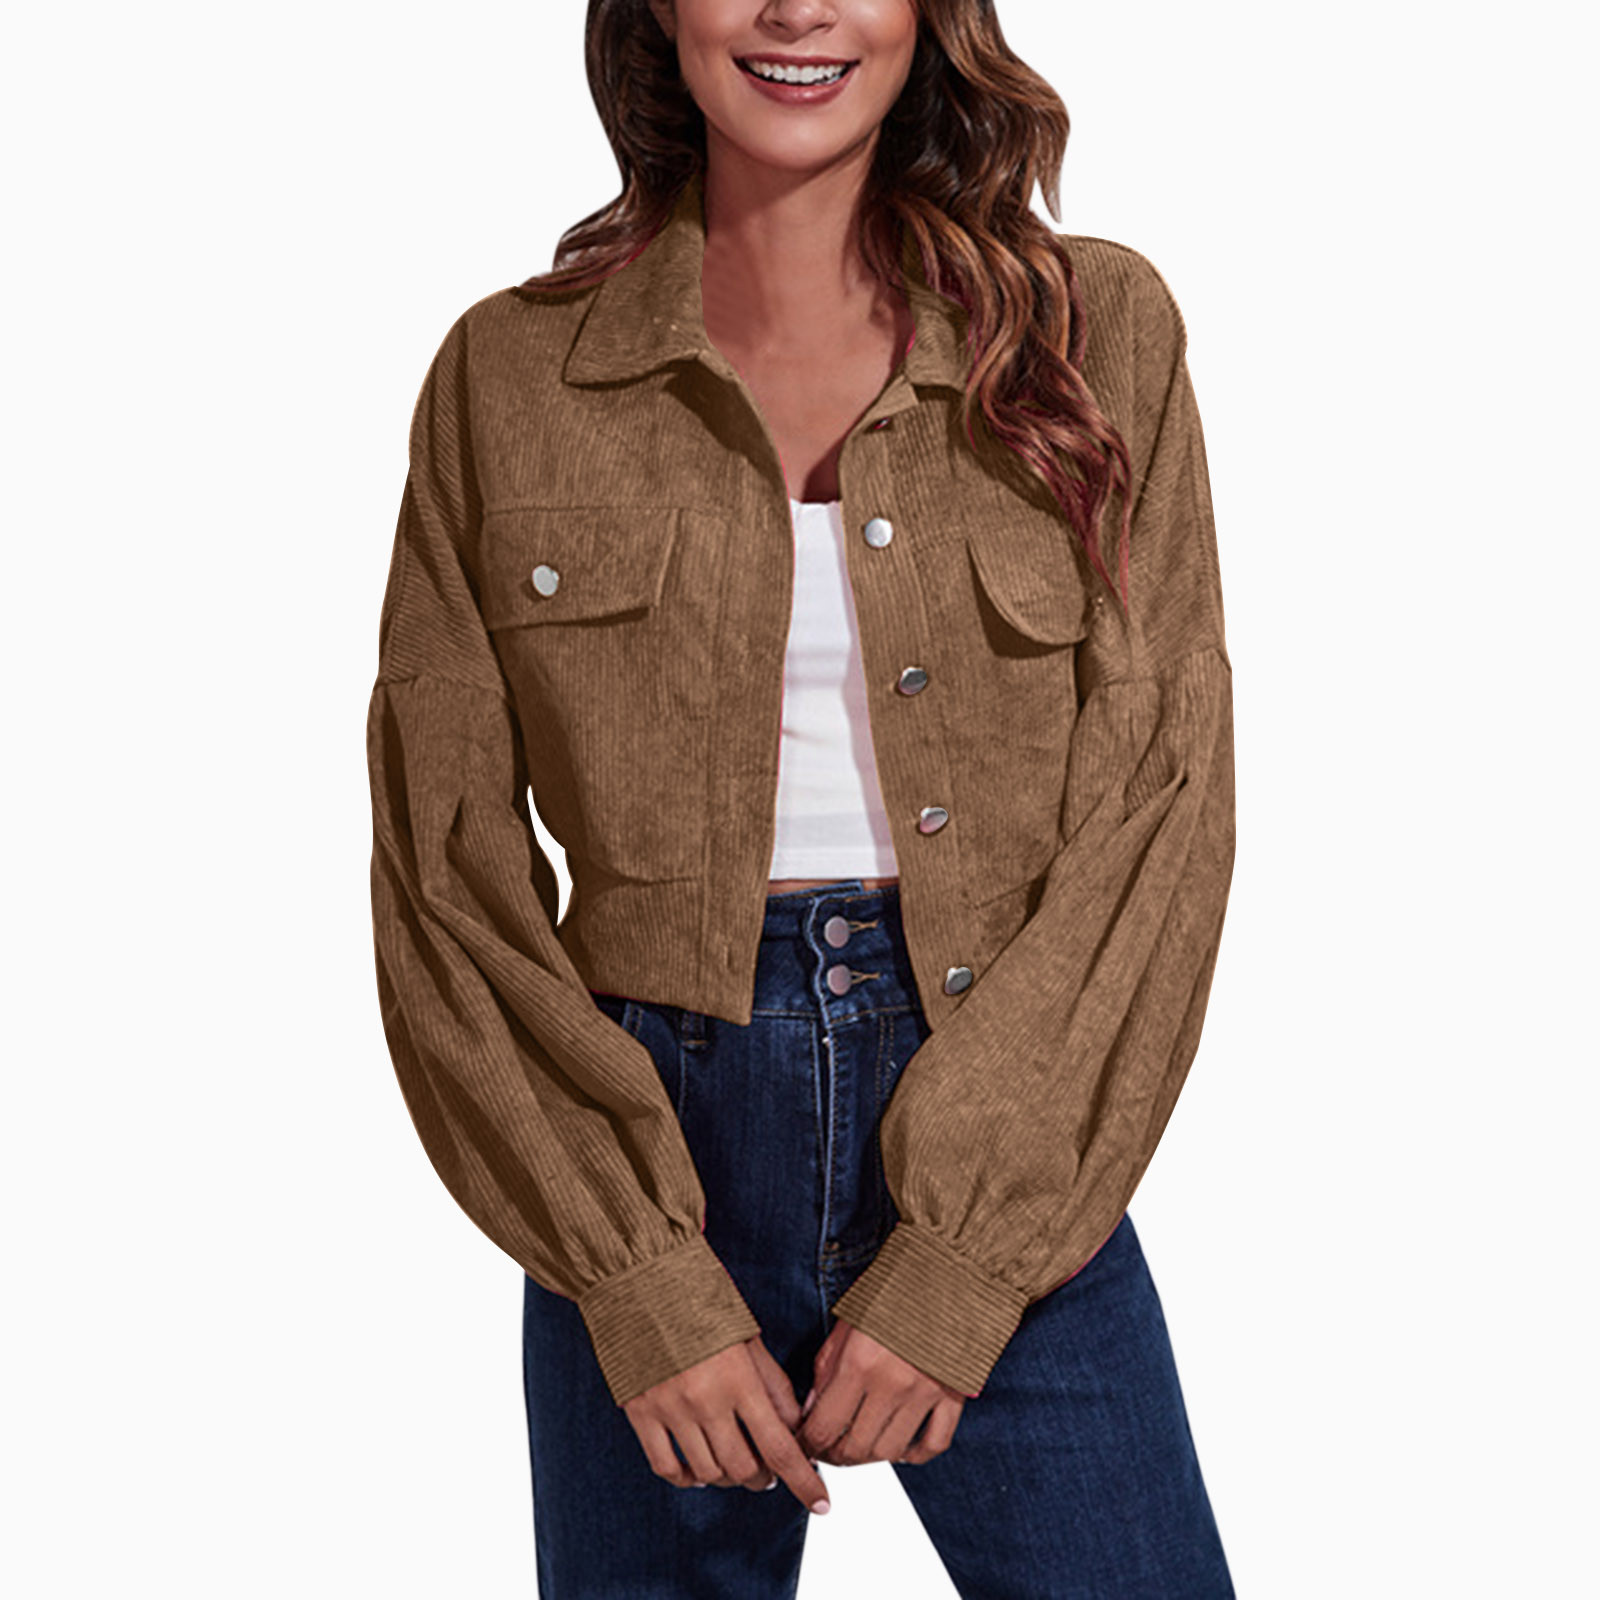 Womens Casual Flannel Wool Blend Lapel Button down Women Business Casual Outfit Women's Fashion Corduroy Jacket Autumn Winter Drop Shoulder Long Sleeve Short Jacket Cycling Jacket Women Winter - image 3 of 6